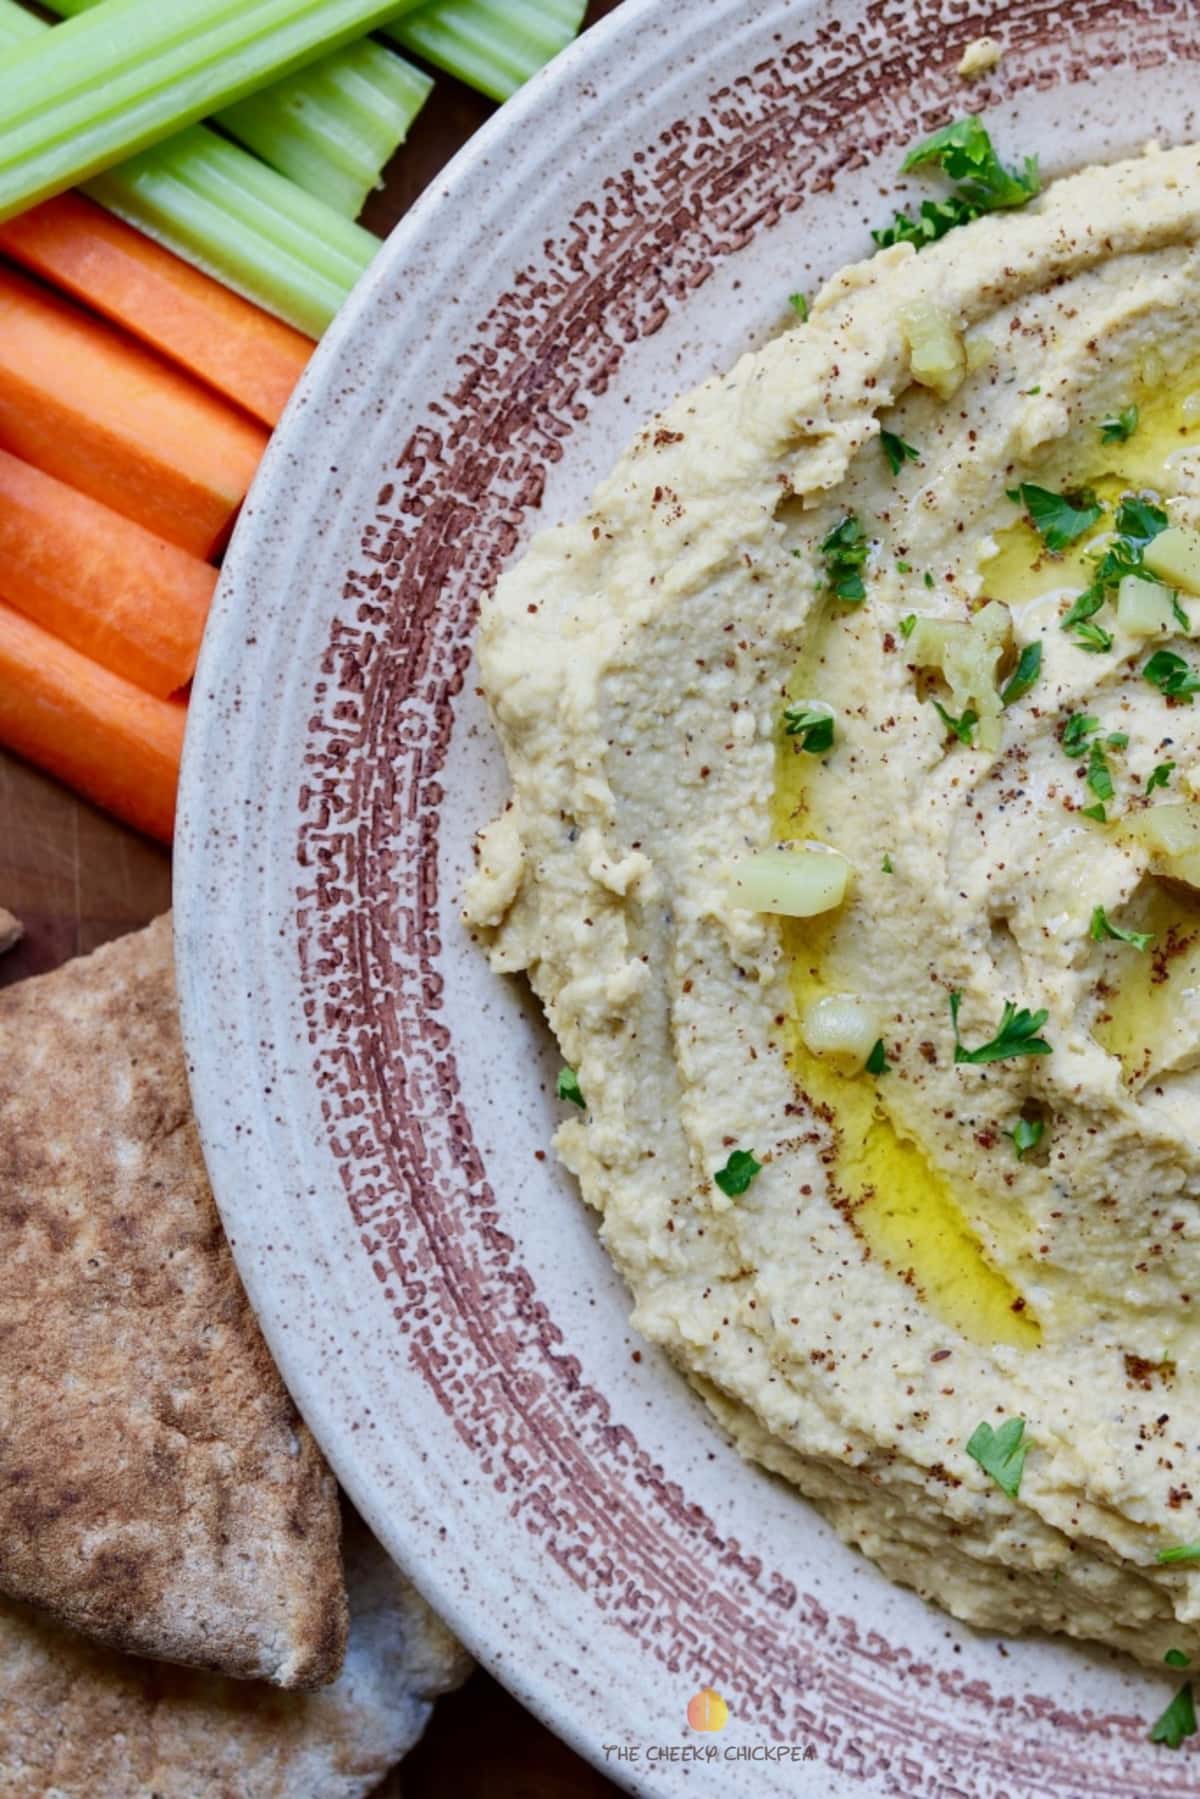 homemade hummus in a bowl along side pita and vegetables